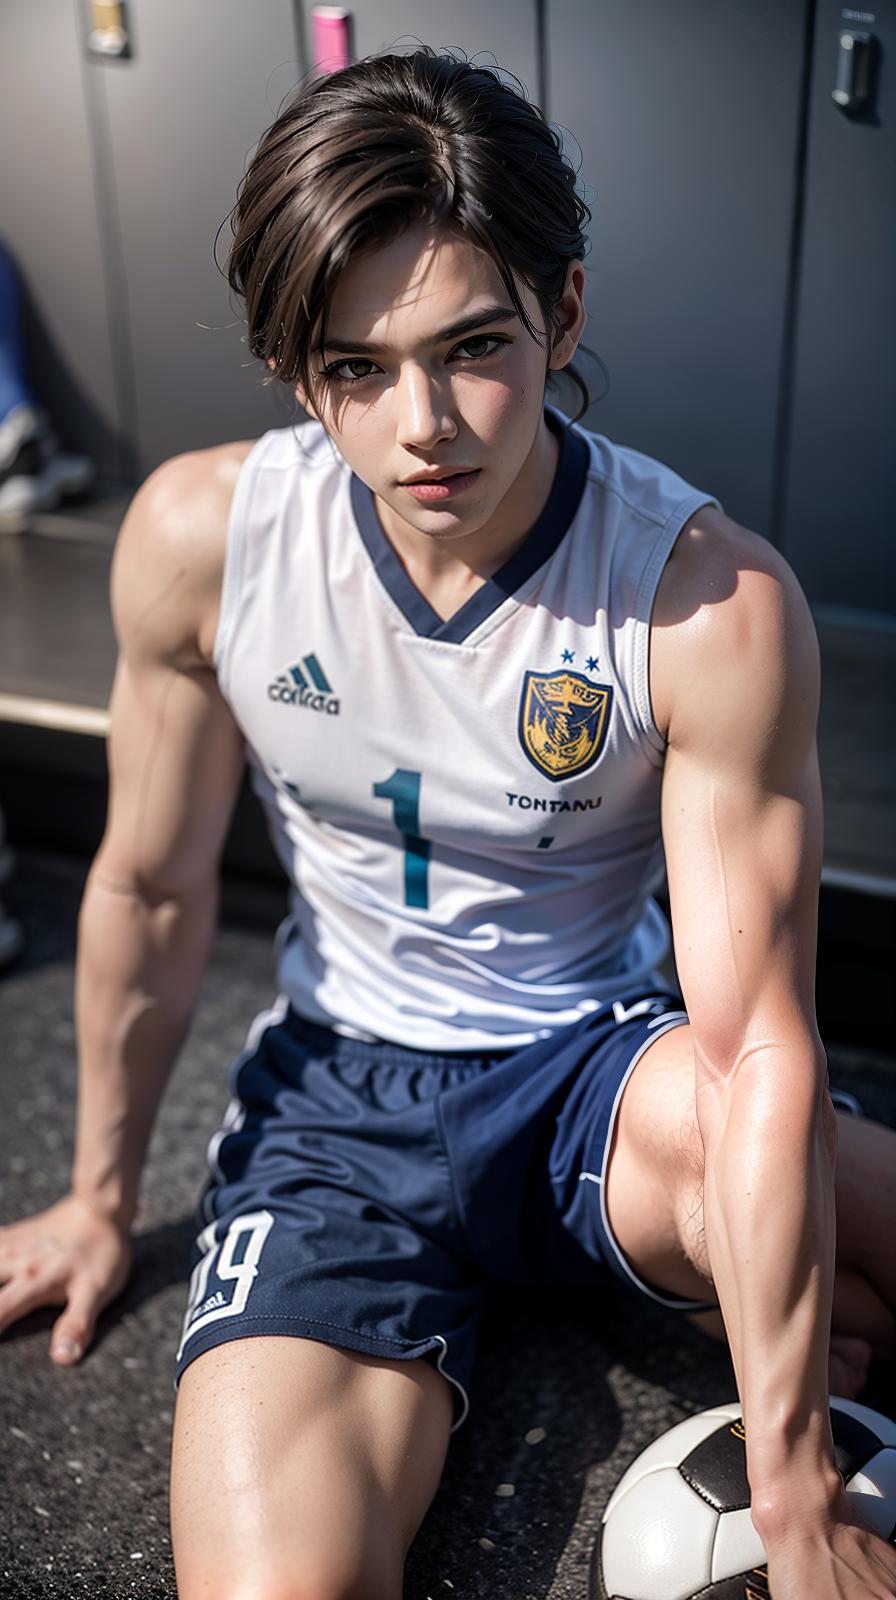  ultra high res, (photorealistic:1.4), raw photo, (realistic face), realistic eyes, (realistic skin), <lora:XXMix9_v20LoRa:0.8>, handsome, (male:2), (young soccer players:1.3), (pompadour:1.1), (white briefs:1.3), (sleeveless:1.2), spike shoes, (soccer shin guards:1.3), young, , (torn blue and white stripes uniform:1.1), sitting posture, (spread legs:1.1), real skin, (sexy posing:1.3), hot guy, (muscular:1.3), (naked:1.1), (bulge:1.1), trained calves, thigh, realistic, lifelike, high quality, photos taken with a single-lens reflex camera, (looking at the camera:1.2), (locker room:1.1)